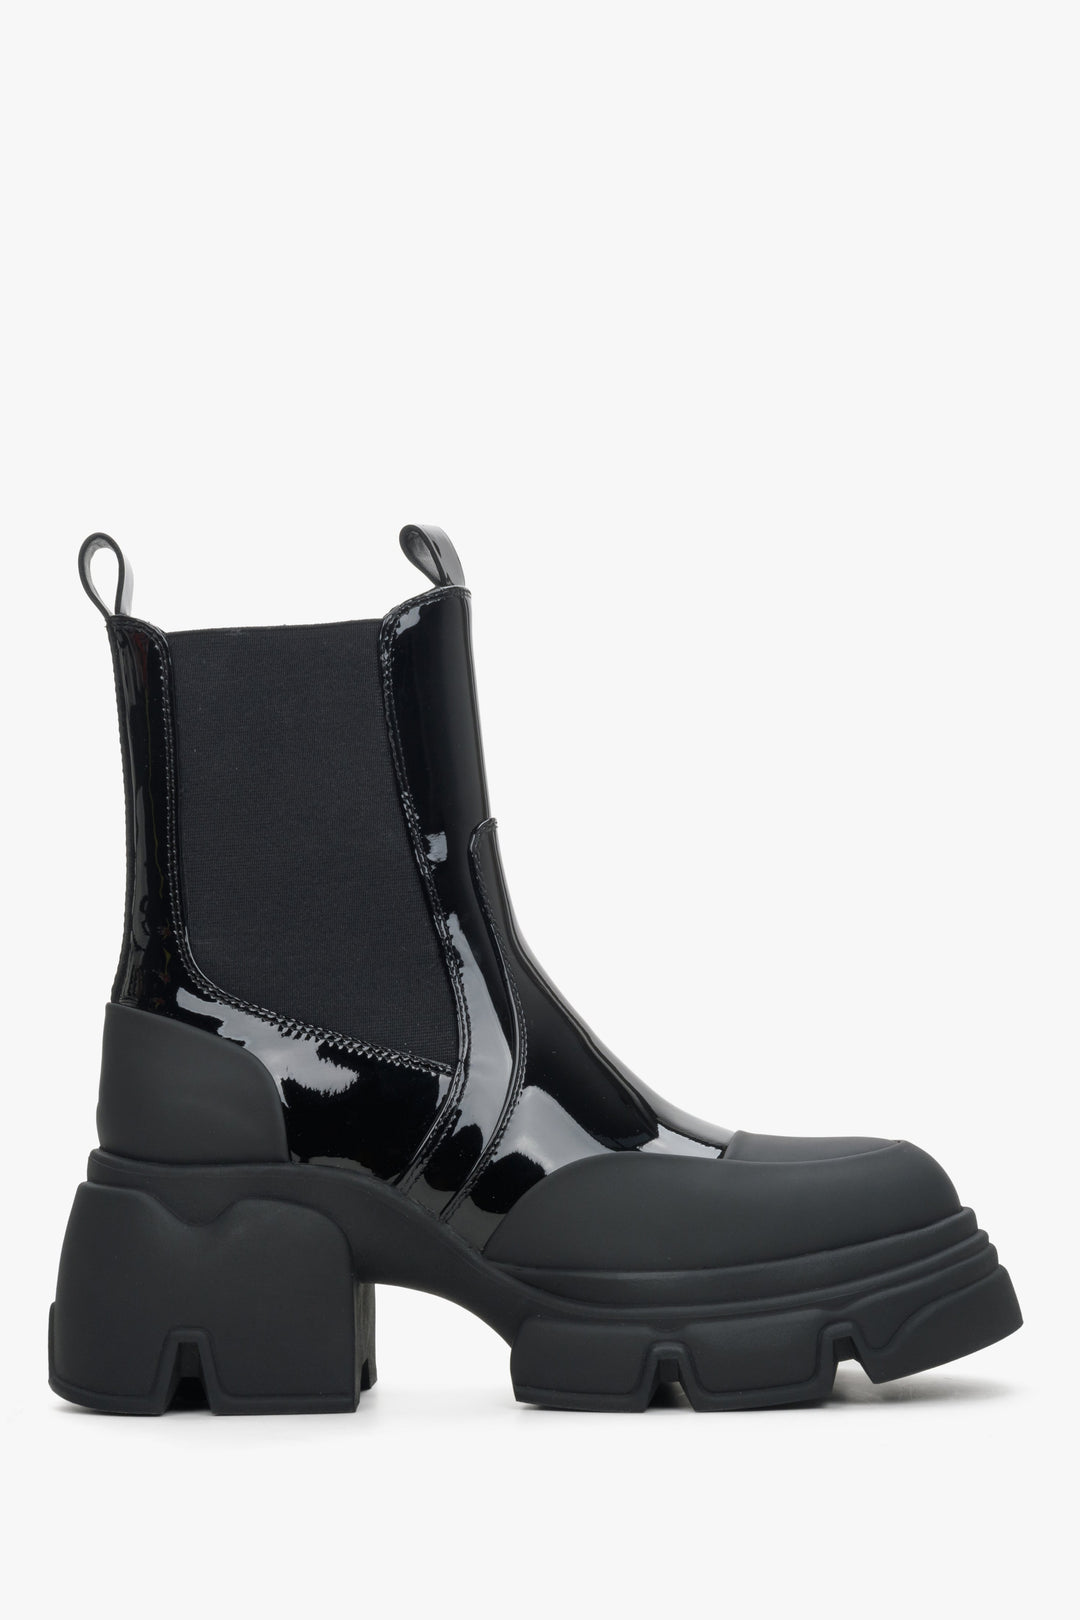 Women's Black Chelsea Boots made of Patent Genuine Leather on a Flexible Platform Estro ER00114315.